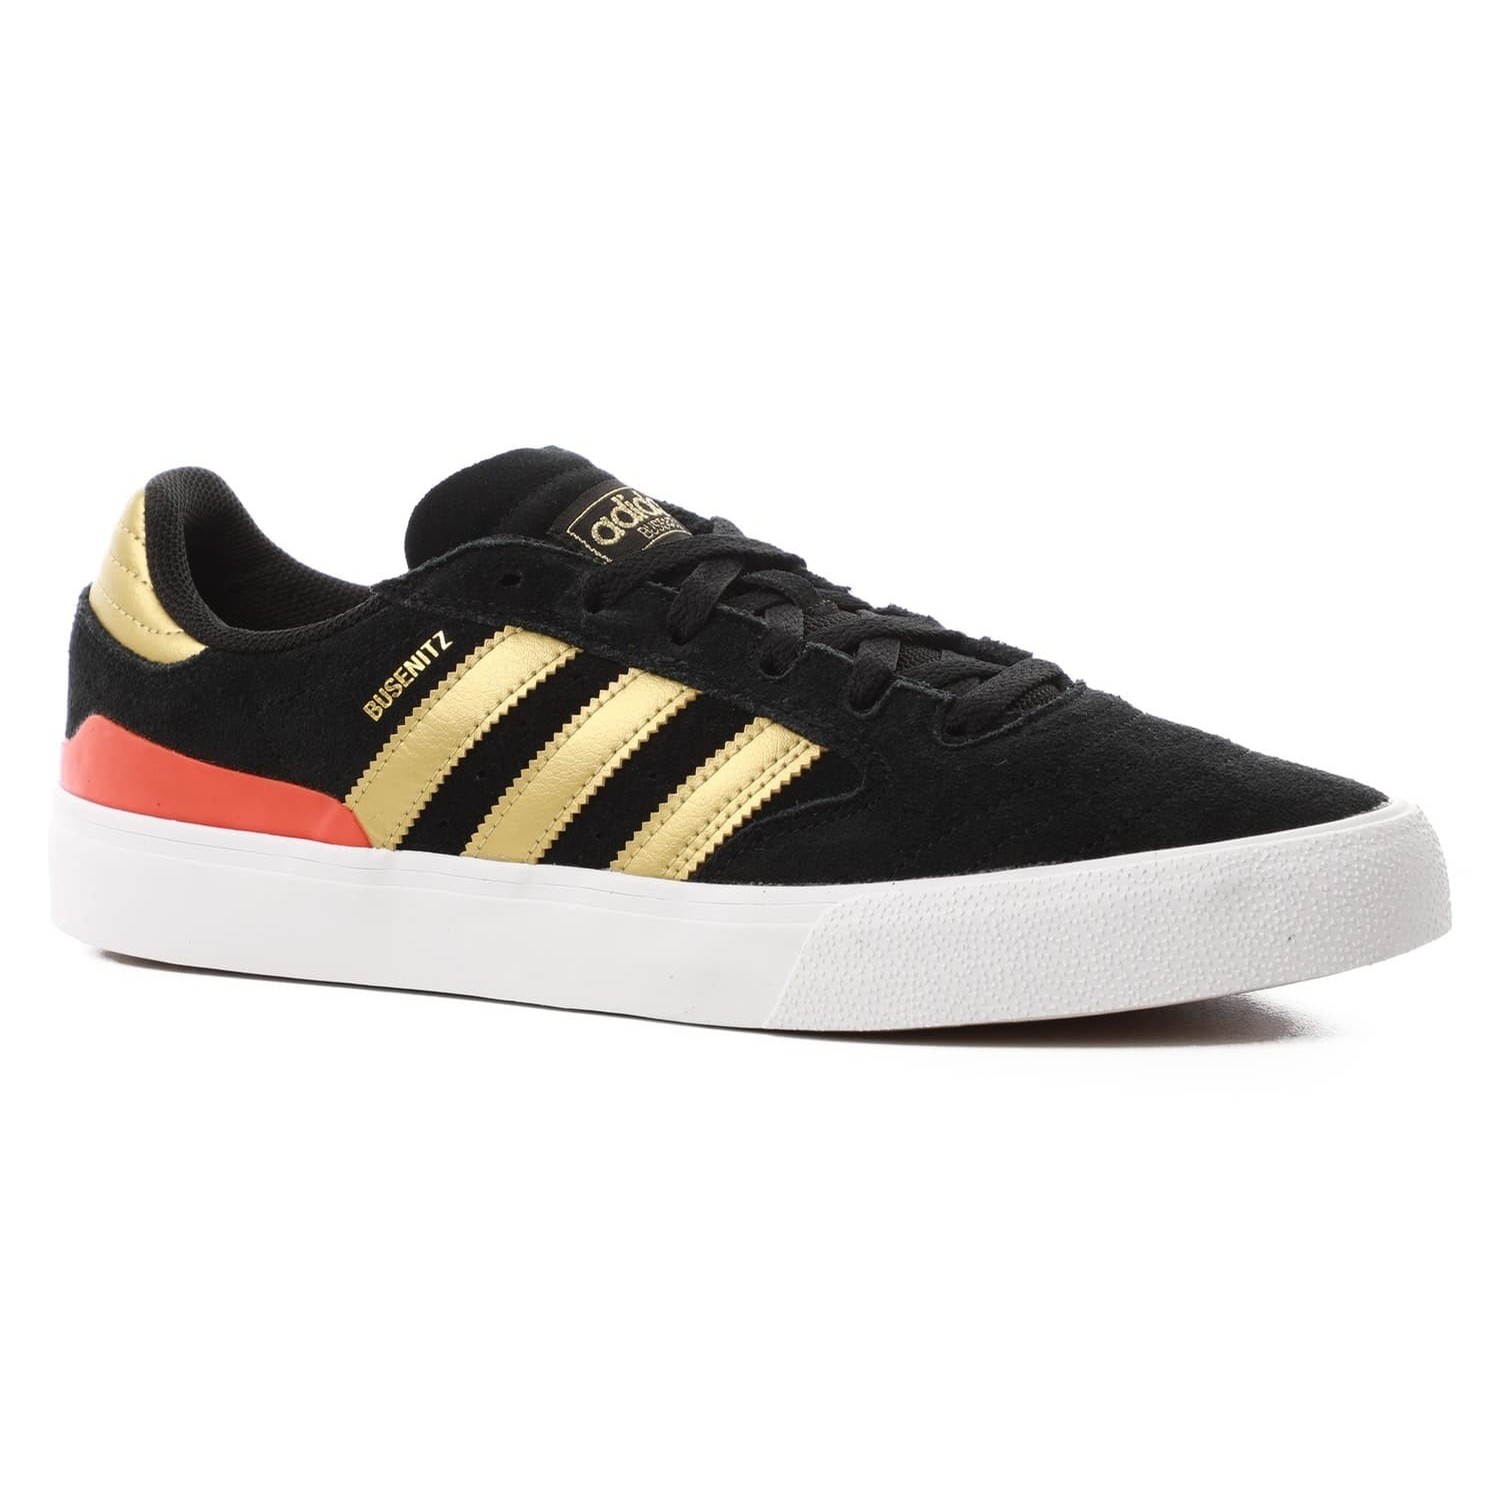 red black and gold adidas